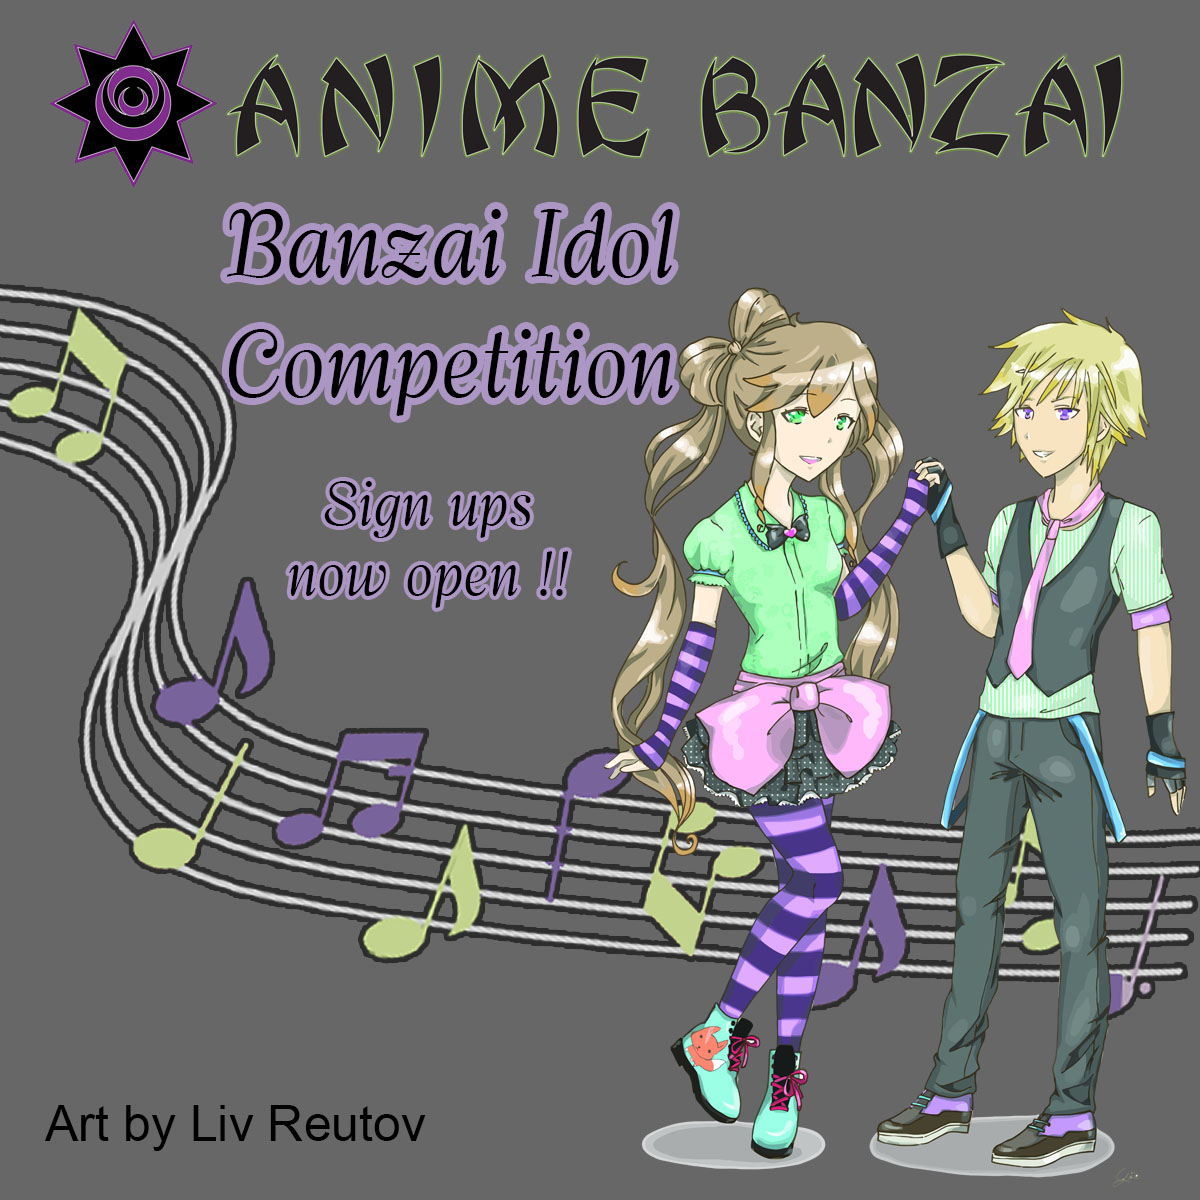 Anime Banzai 2018 In Layton png images | PNGEgg-demhanvico.com.vn